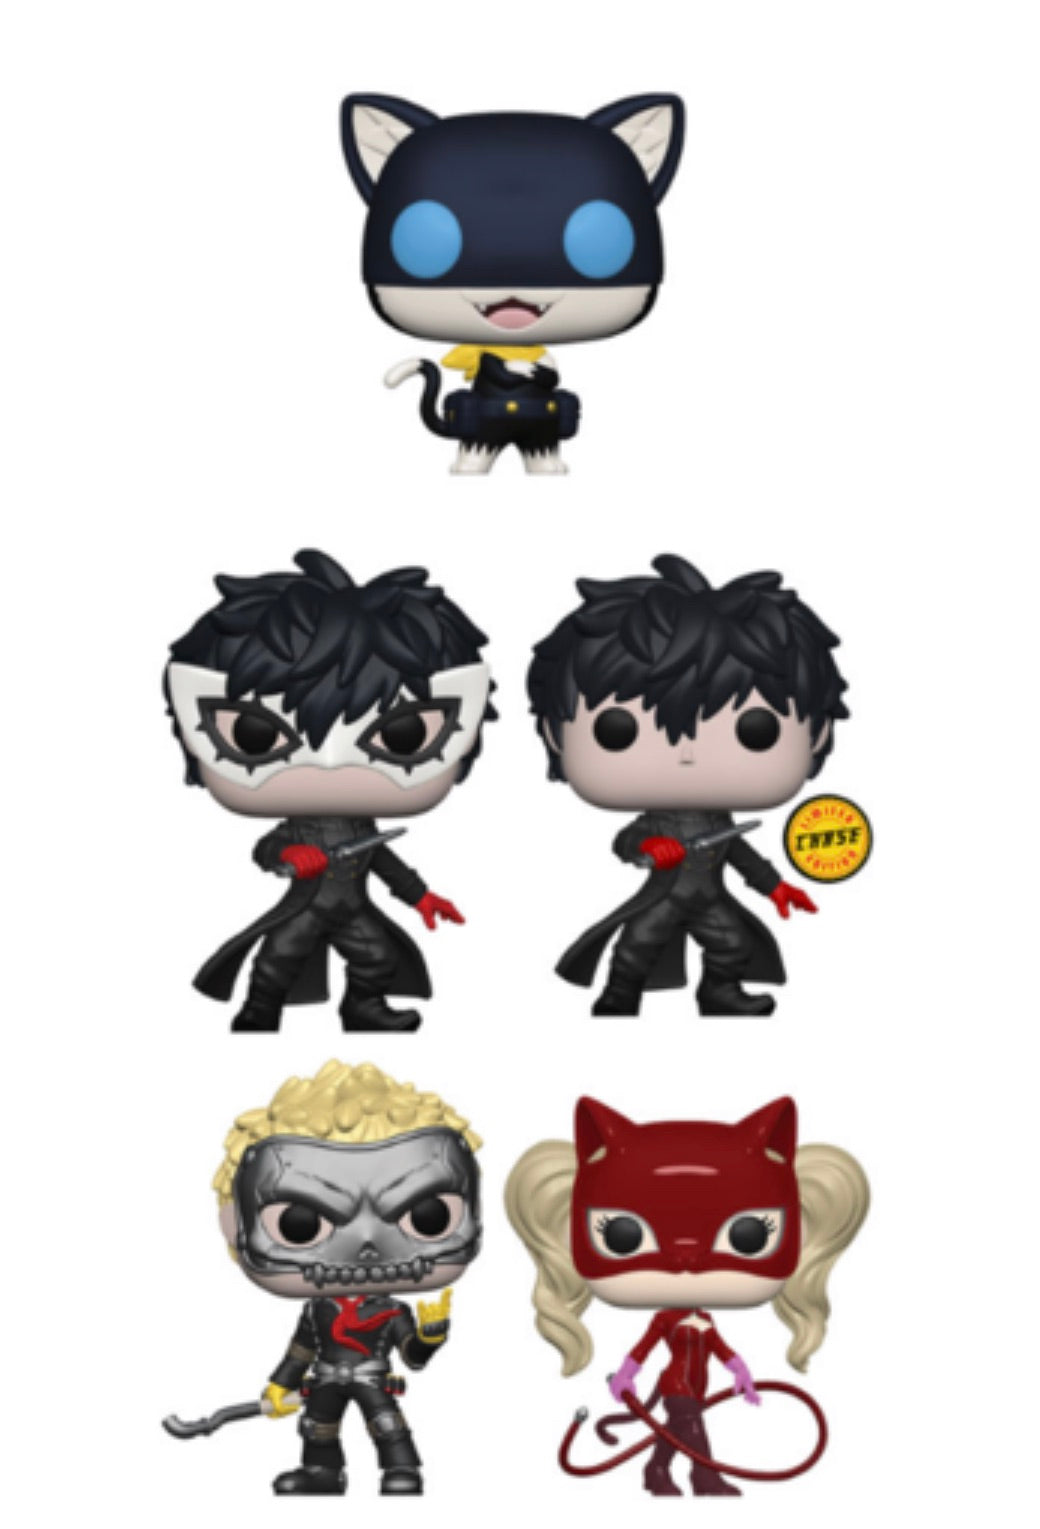 PERSONA 5 FUNKO POP! COMPLETE SET OF 5 CHASE INCLUDED (PRE-ORDER)